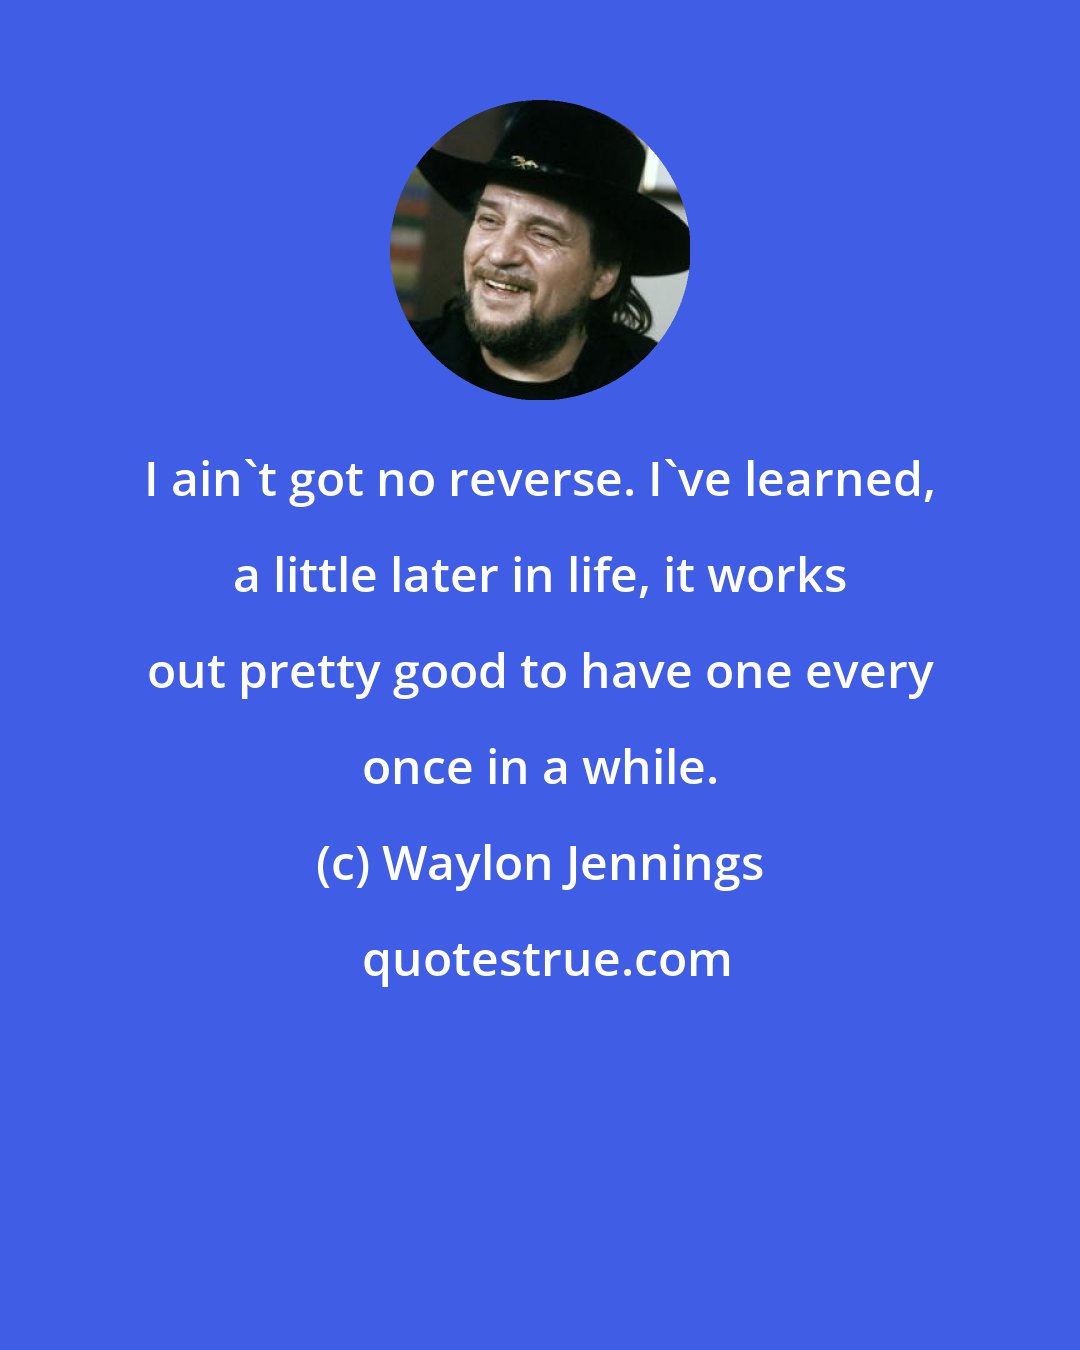 Waylon Jennings: I ain't got no reverse. I've learned, a little later in life, it works out pretty good to have one every once in a while.